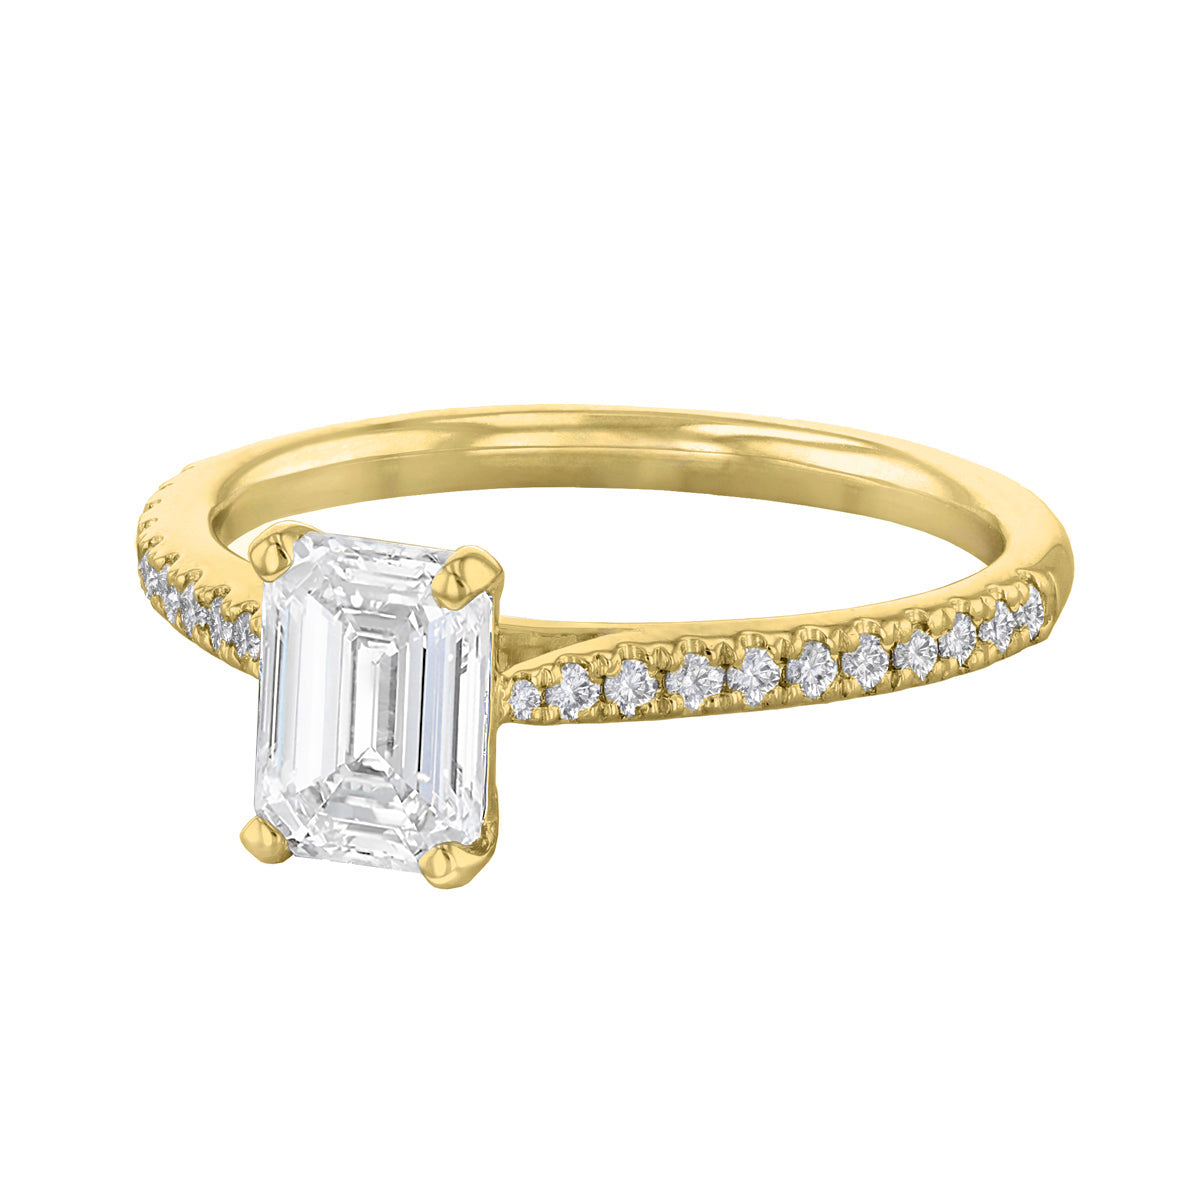 2-00ct-ophelia-shoulder-set-emerald-cut-solitaire-diamond-engagement-ring-18ct-yellow-gold